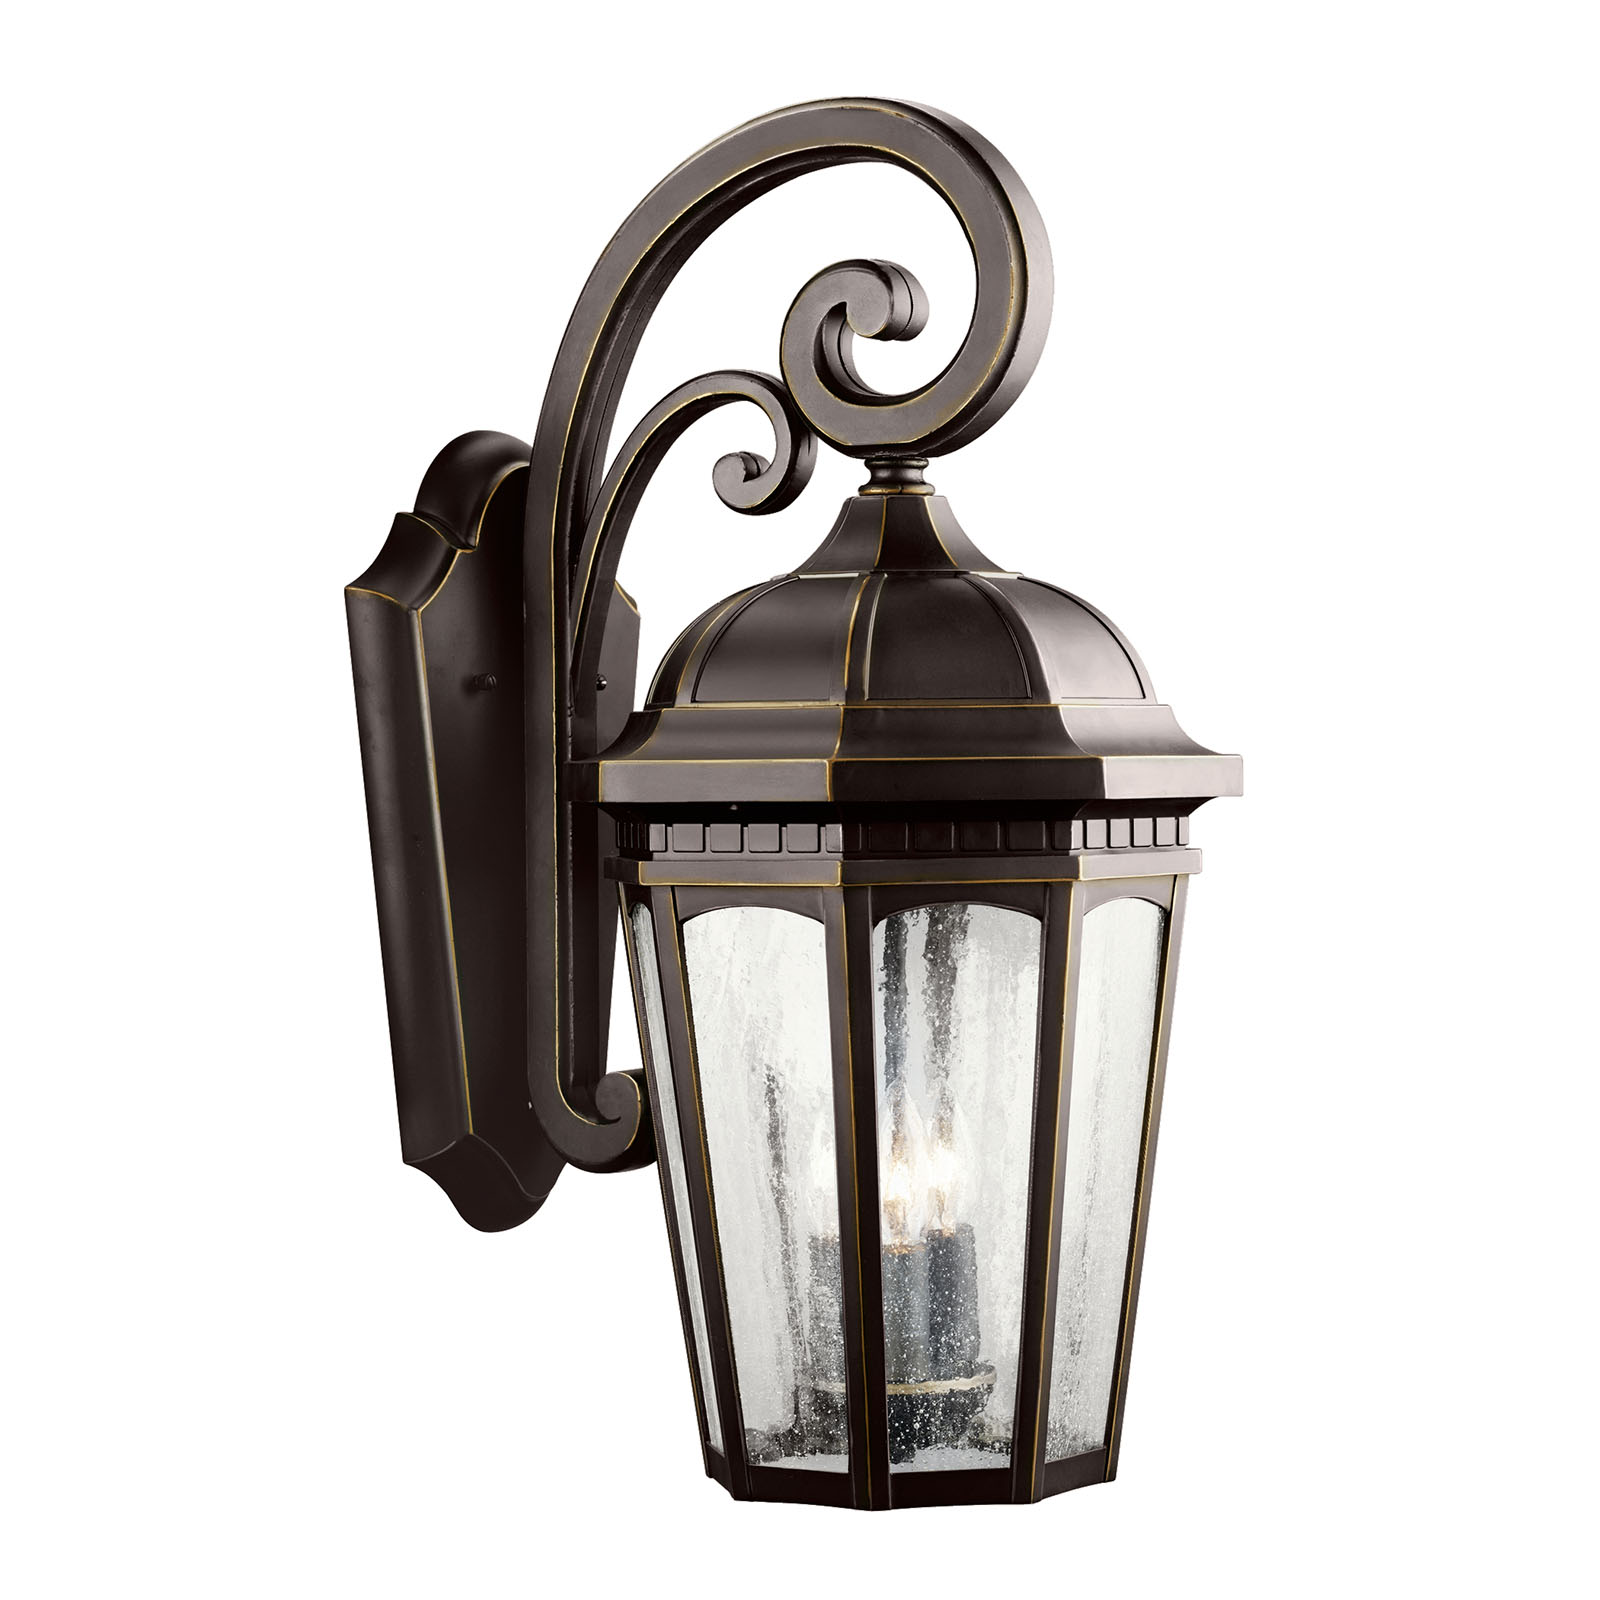 Uncluttered and traditional, this attractive wall lantern from the Courtyard(TM) collection adds the warmth of a secluded terrace to any patio or porch.  What a welcoming beacon for your home's exterior. Done in a Rubbed Bronze finish with Clear-seedy glass. 3-light, 60-W. Max. (C) Width 10-1/2in., Height 22-1/2in., Extension 13-1/2in..  Height From center of wall opening 9in.. Back plate size: 7-1/4in. x 13-1/2in.. U.L. listed for wet location.